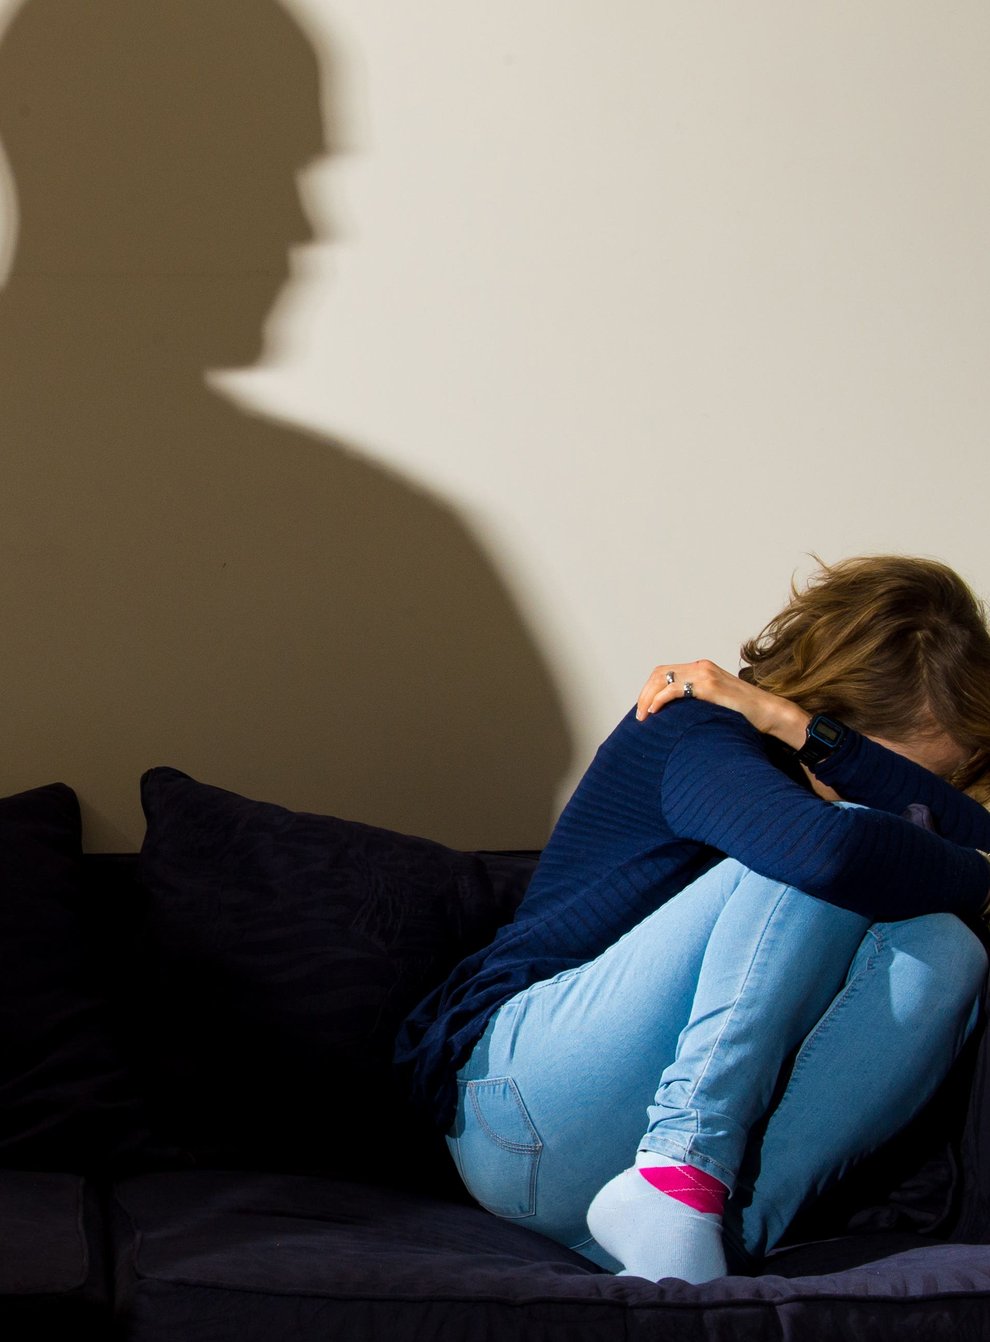 Refuge is calling for more education about the signs of domestic abuse (Dominic Lipinski/PA)